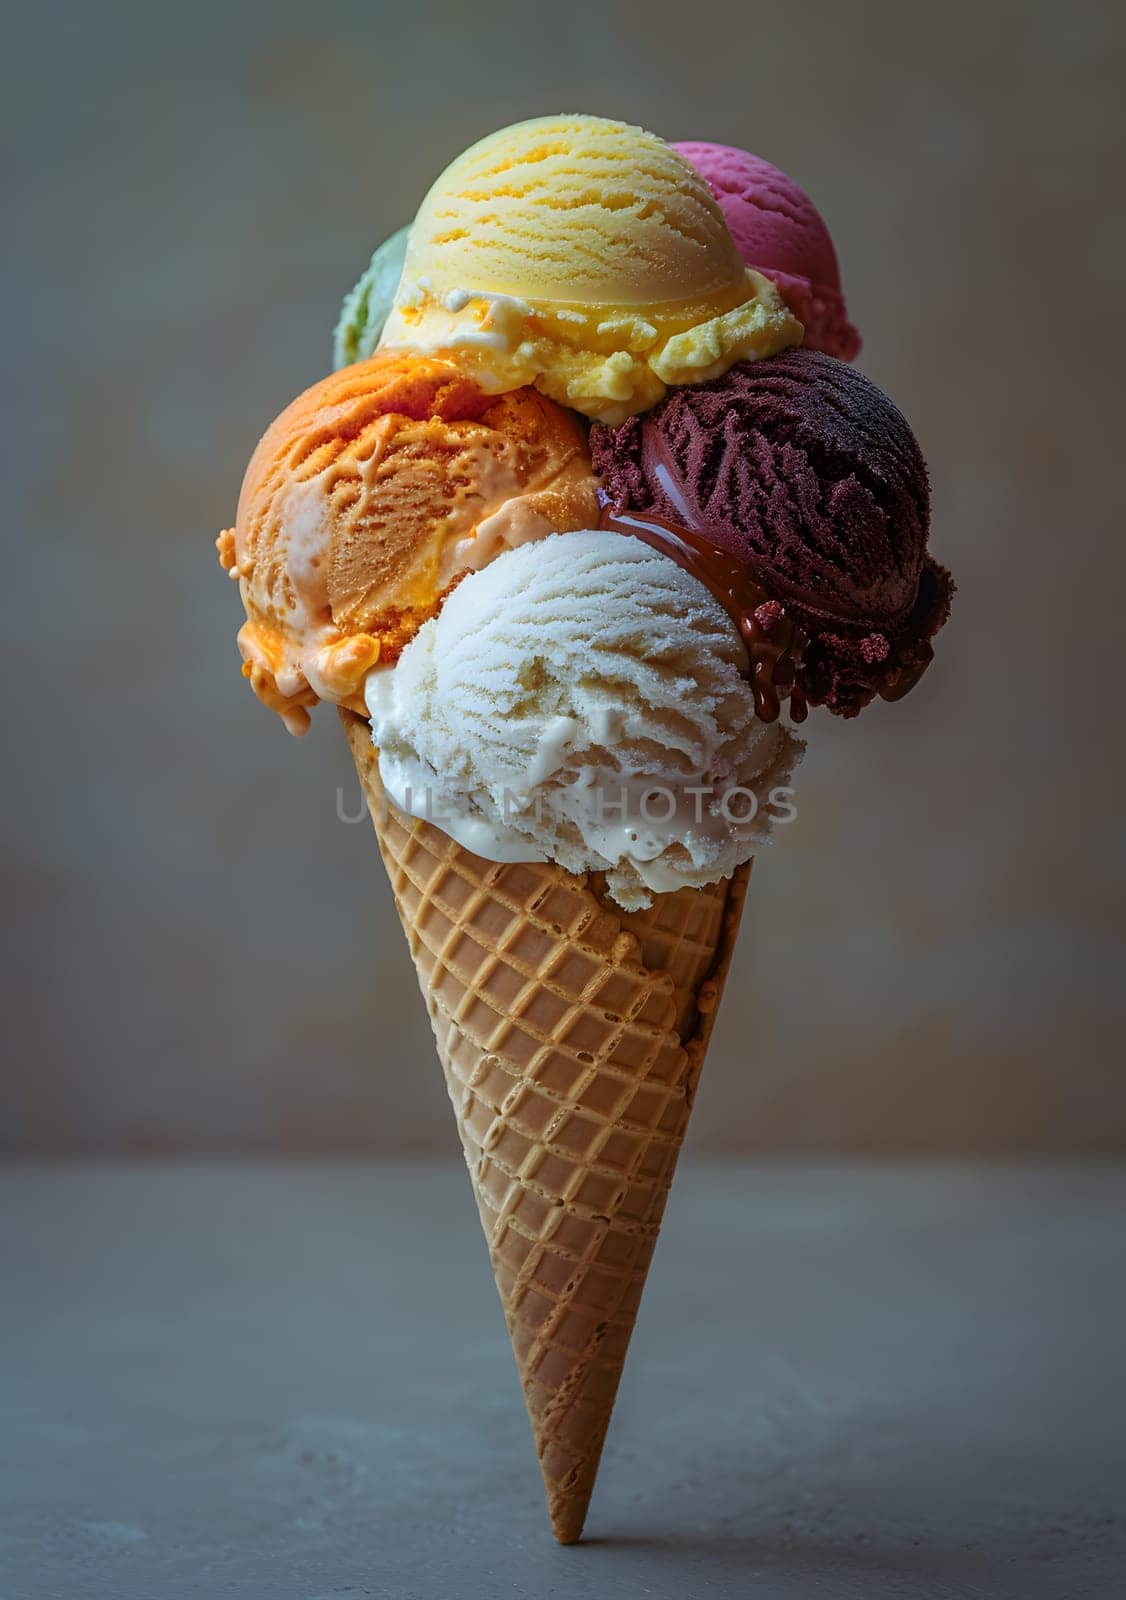 Indulge in a waffle cone filled with a mix of delicious ice cream flavors like gelato, sorbetes, and soy ice cream. A perfect treat from the world of cuisine and fast food